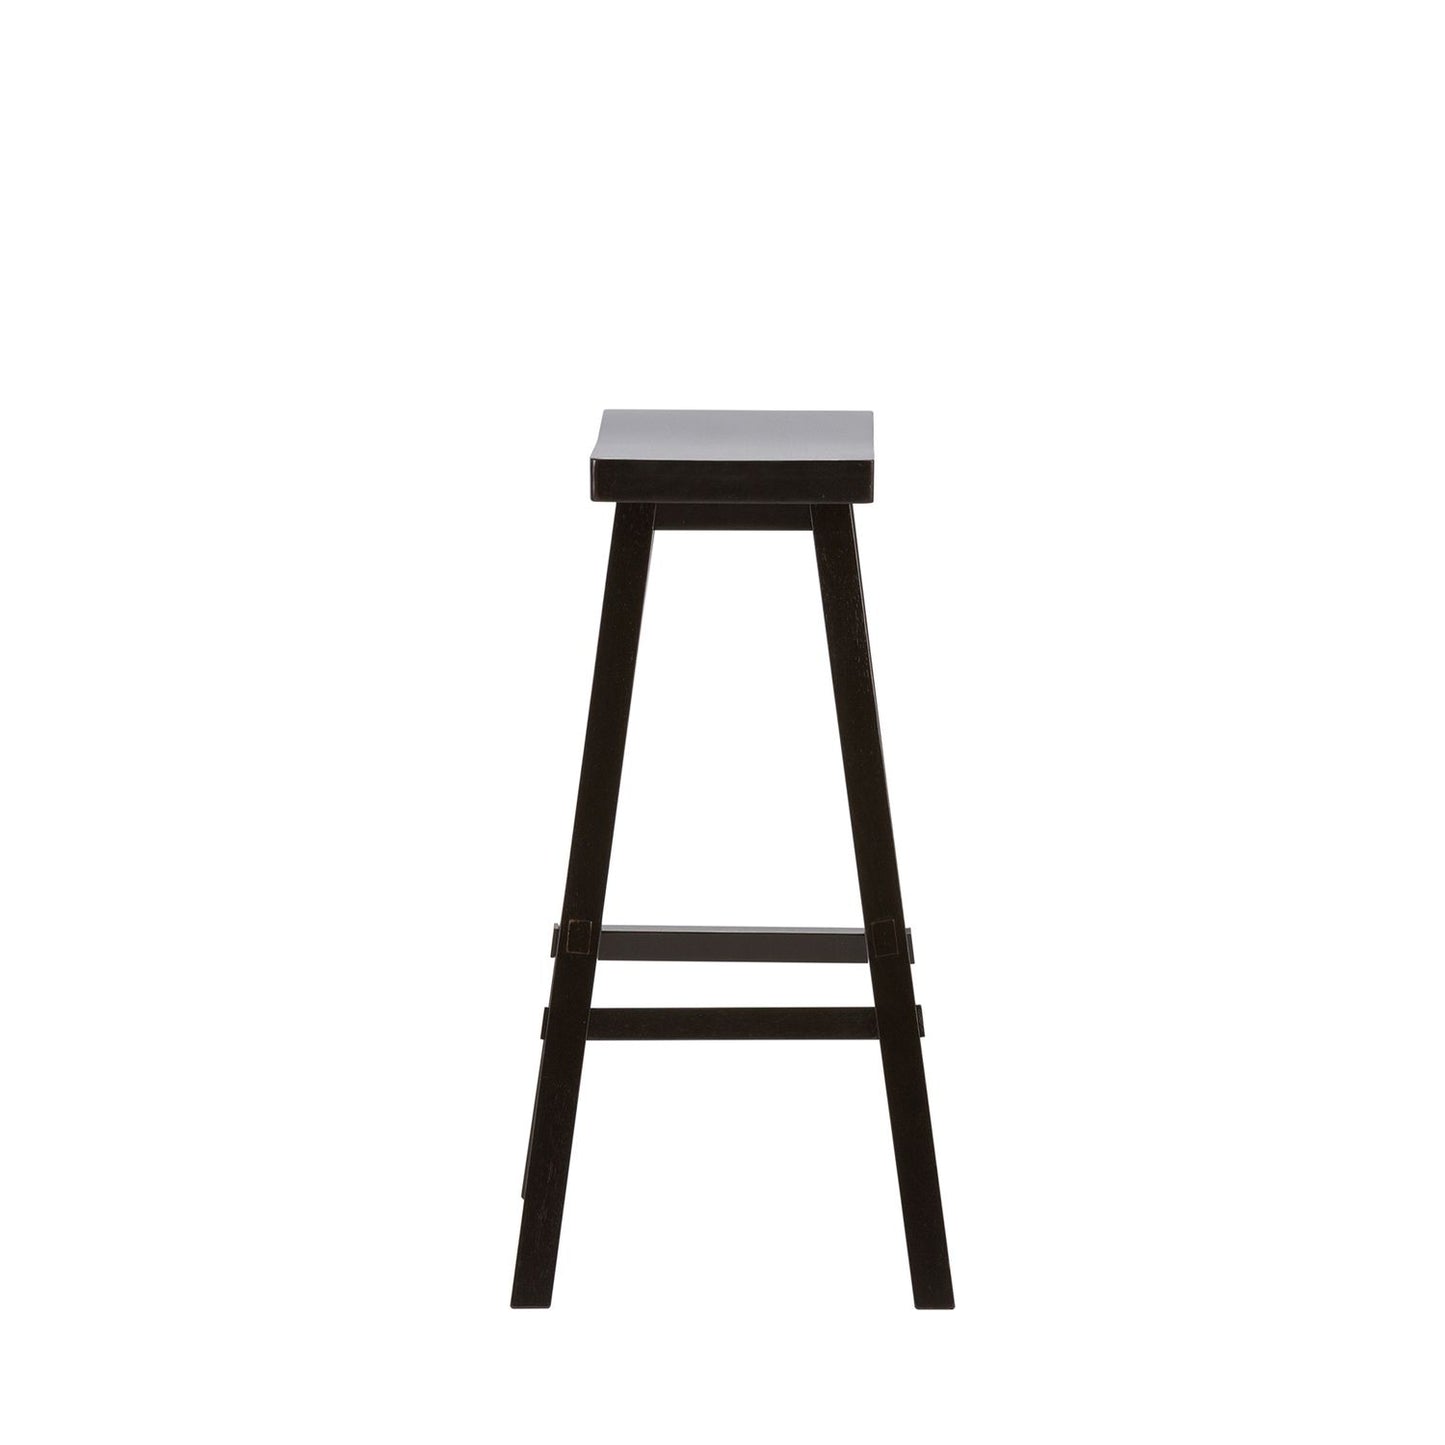 Creations II Collection Sawhorse Saddle Stool Black 30 Inch